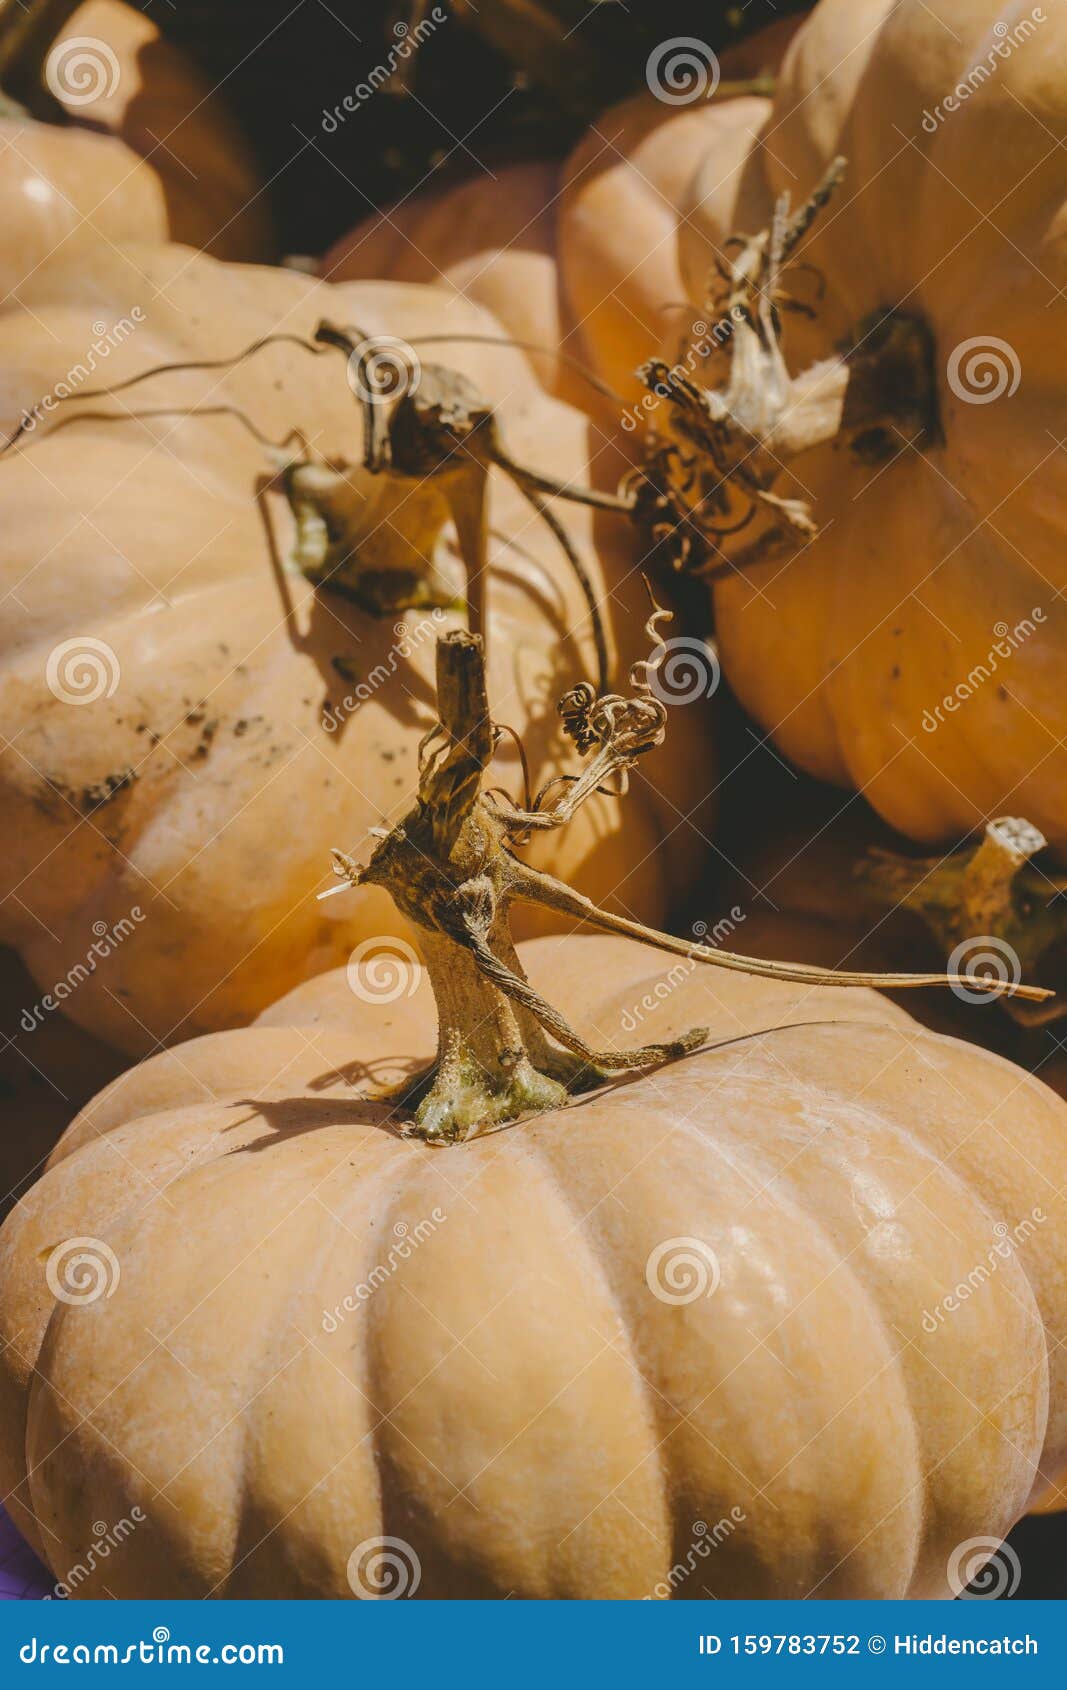 decorative mini pumpkins and gourds, on locale farmers market; autumn background